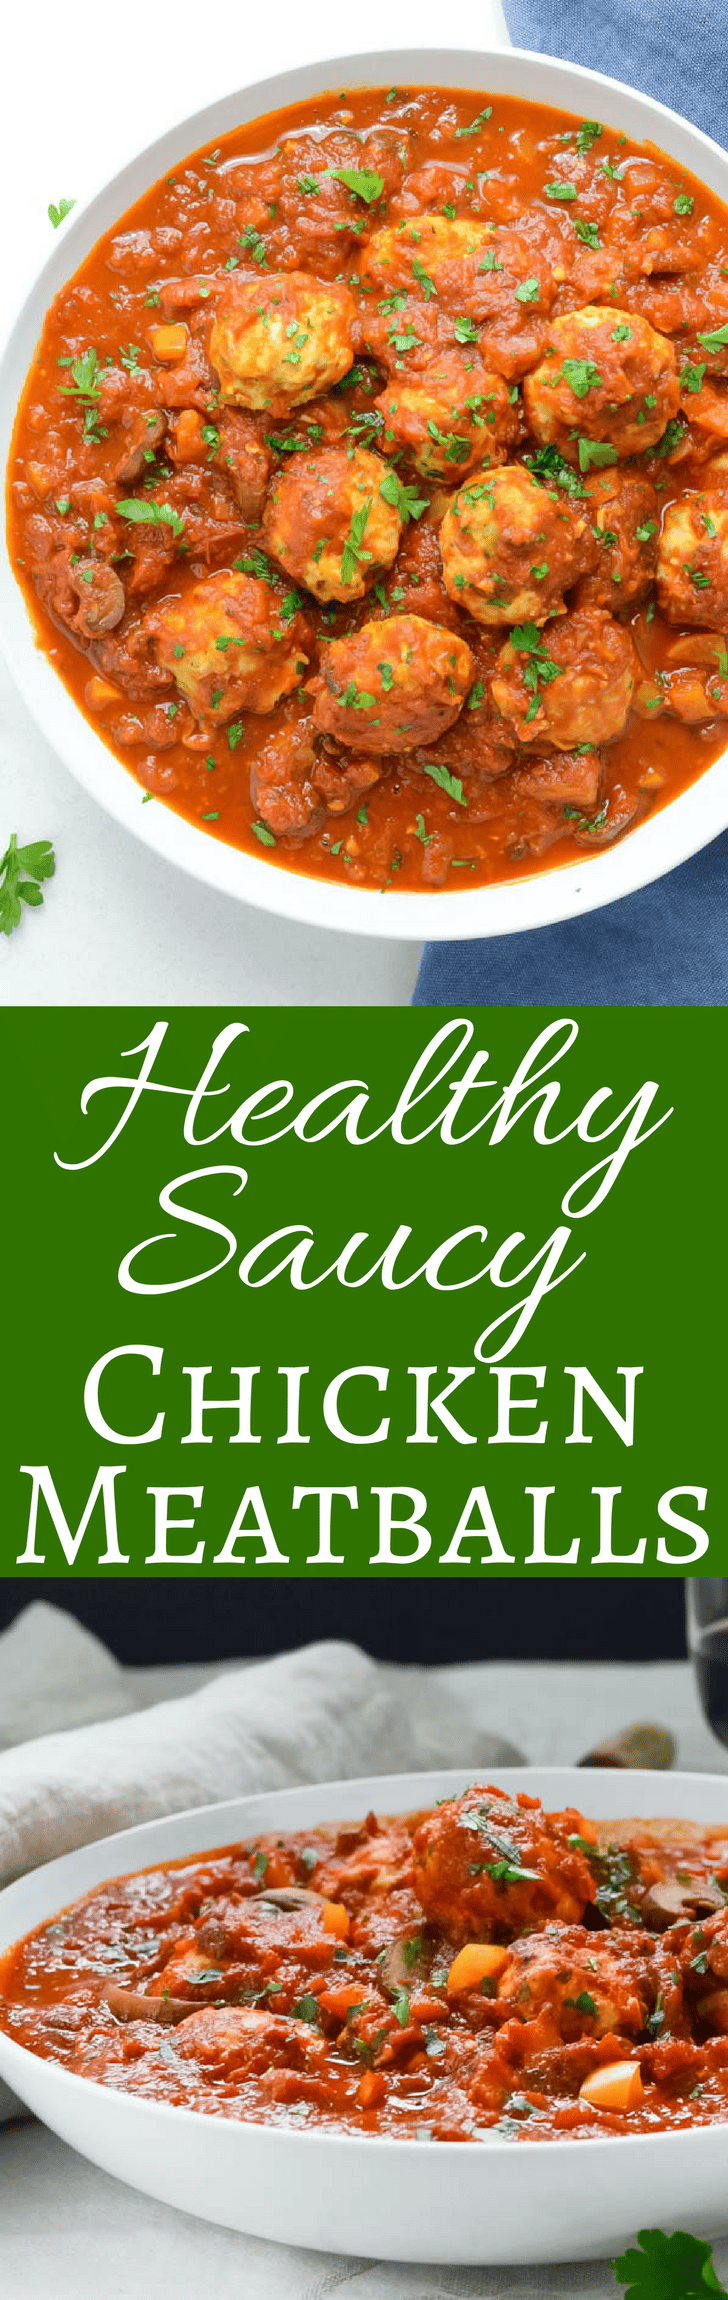 Kids love this healthy meatball recipe, made with ground chicken and hidden vegetables. These healthy saucy chicken meatballs are great over pasta, spaghetti squash or zoodles plus it's an easy ground chicken recipe. #chicken #groundchicken #chickenmeatballs #groundchickenmeatballs #healthychickenmeatballs #bestchickenmeatballs #chickenminceballs #healthymeatballrecipe #zucchini #onions #parmesan #mushrooms #tomatosauce #spaghettisauce #marinarasauce #marinara #italianrecipe #spaghetti #spaghettiandmeatballs